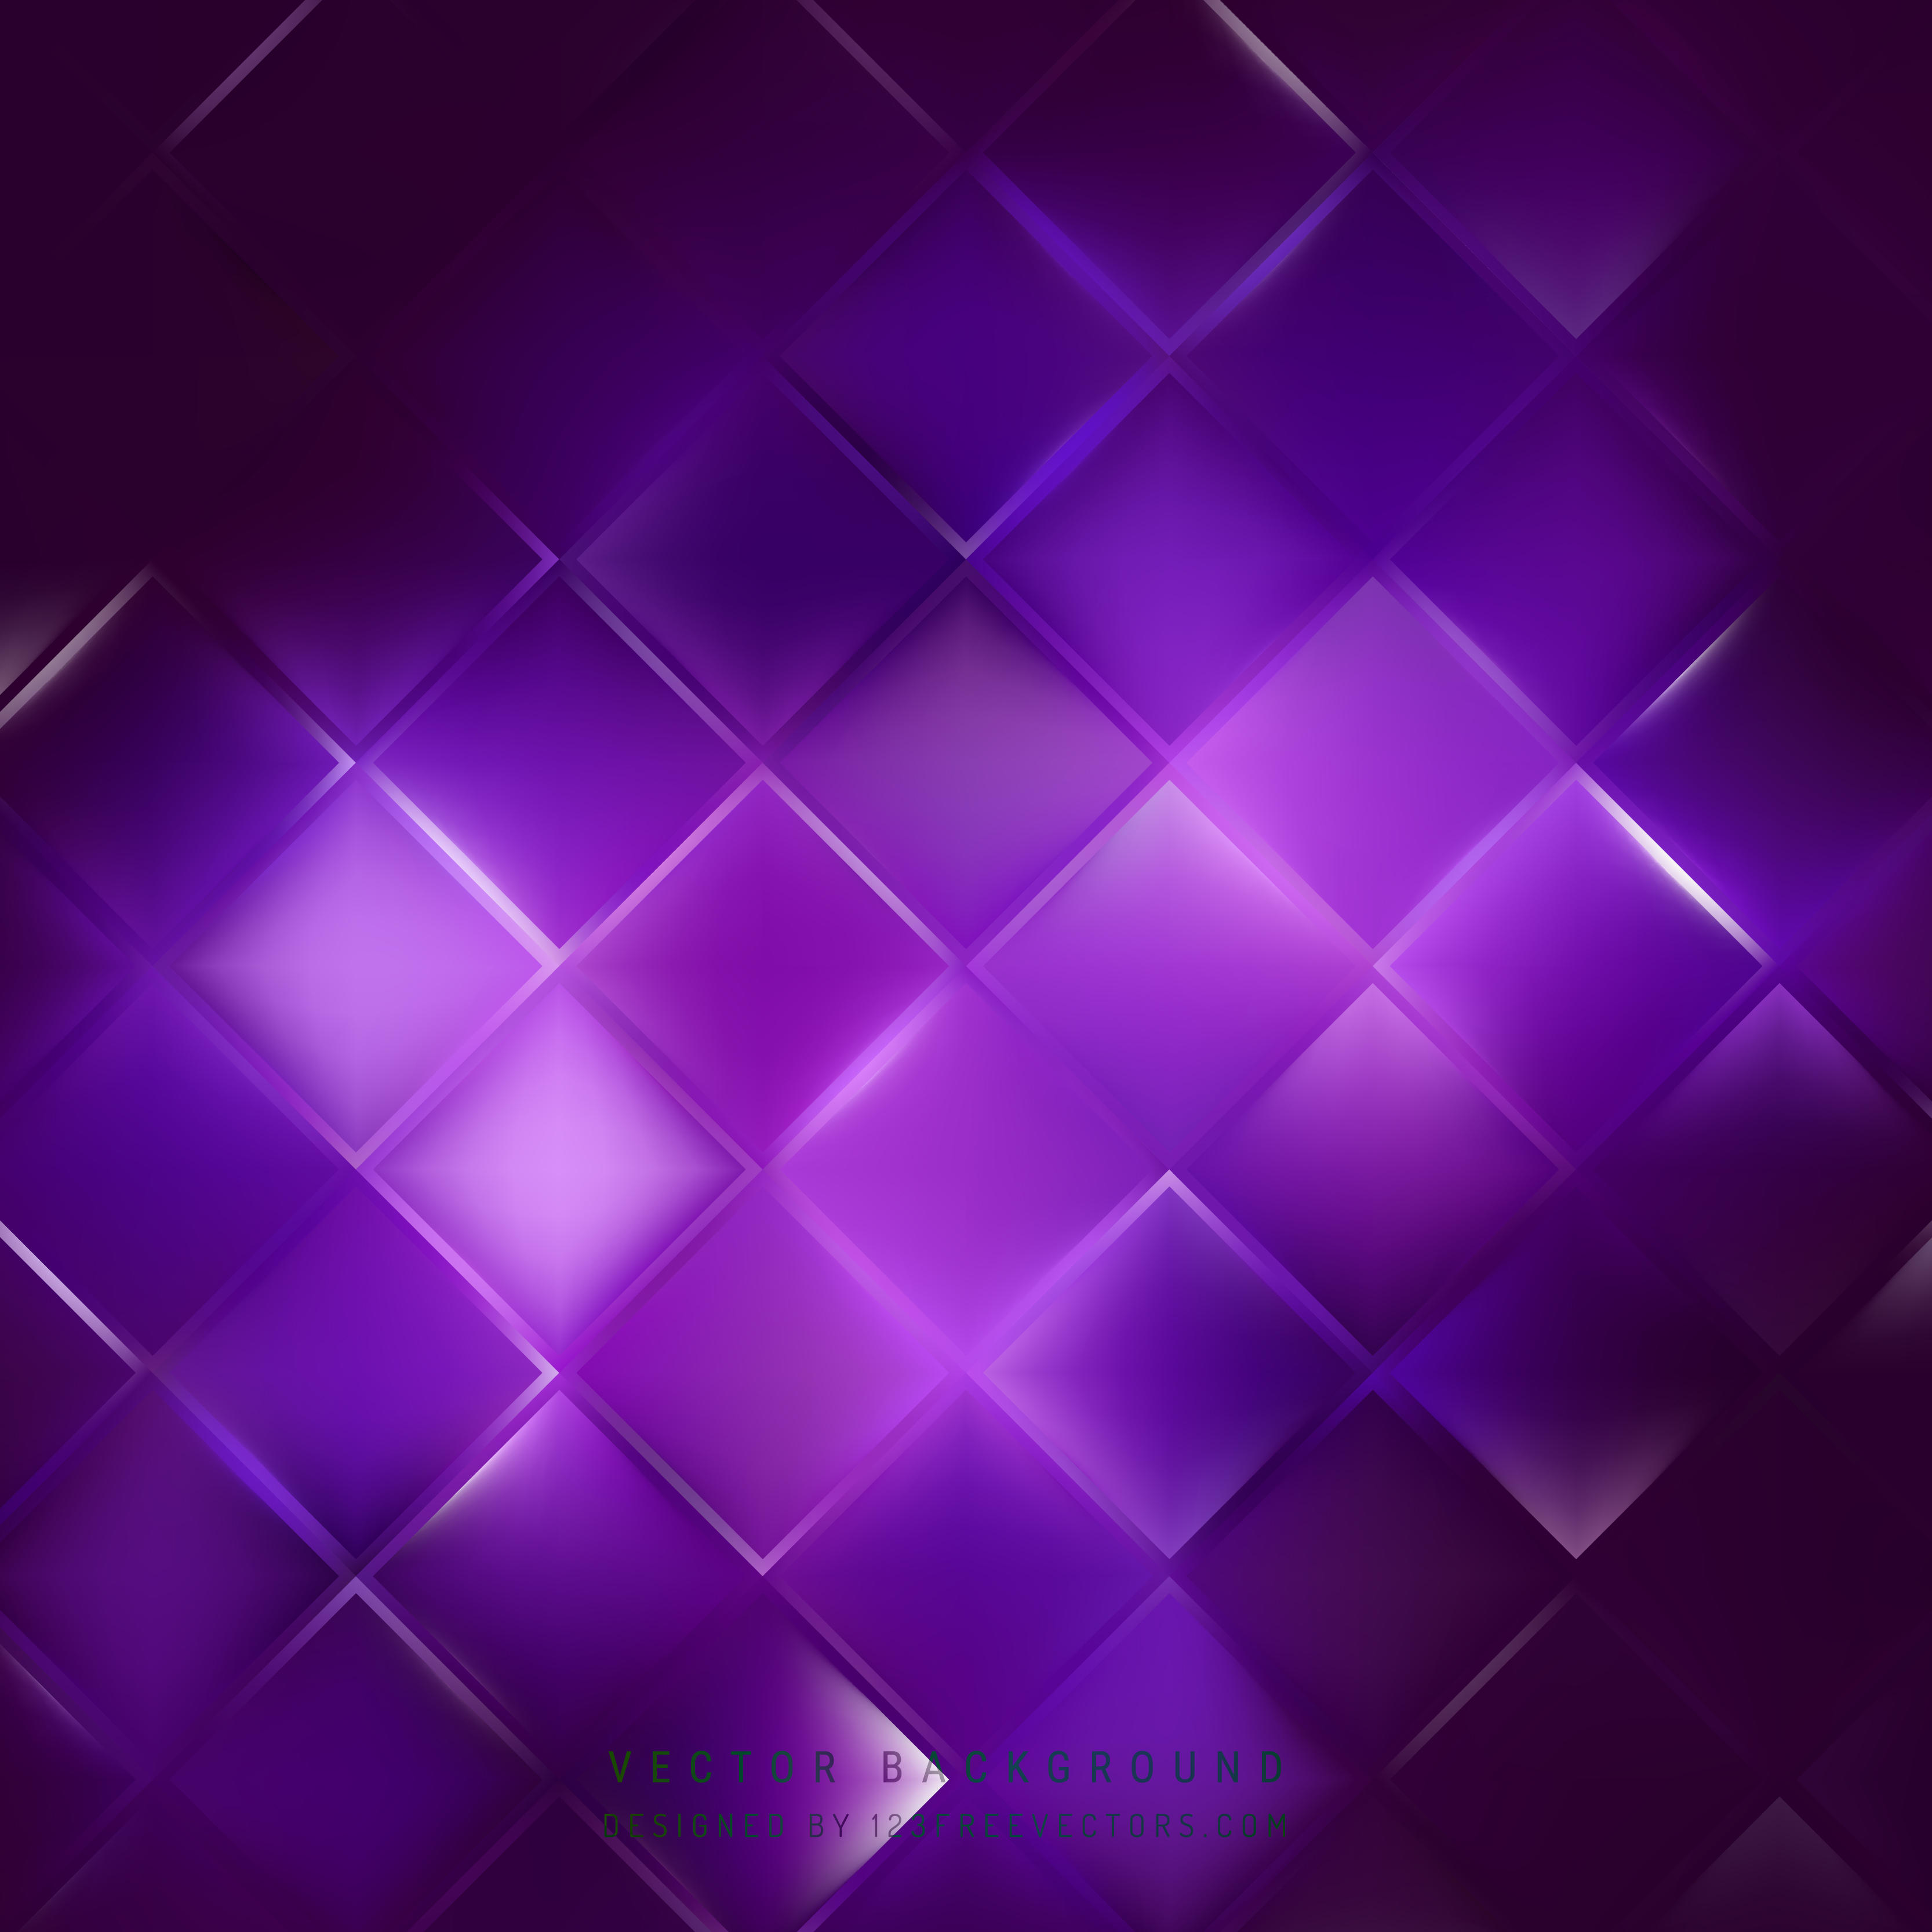 Abstract Dark Purple Square Background Template